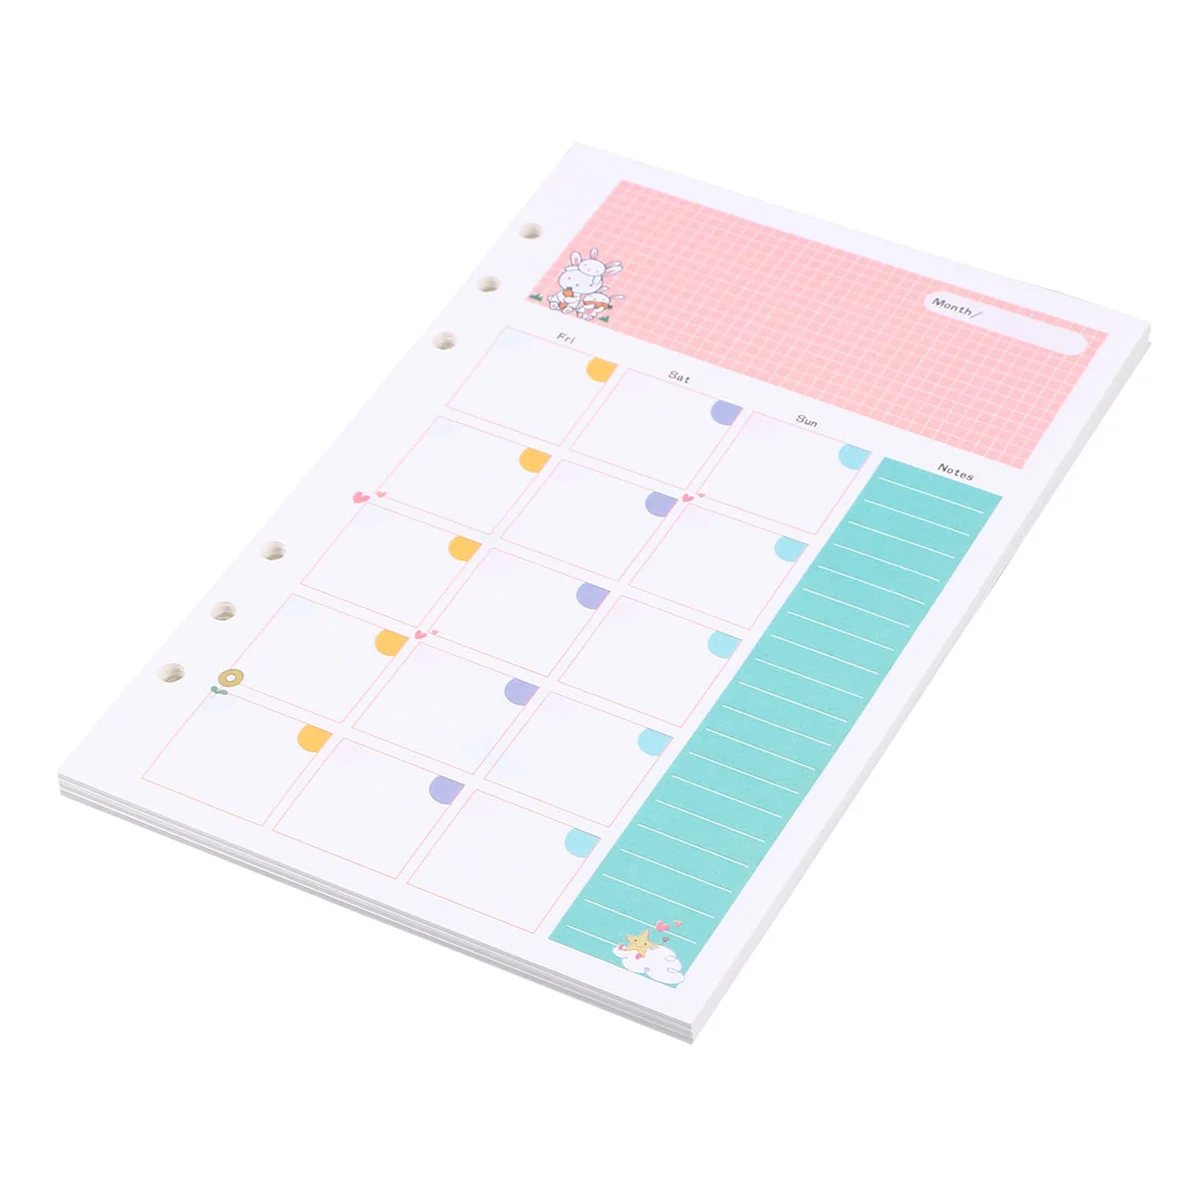 

Paper Planner A5 Binder Loose Refill Leaf Do List Monthly Inserts Daily Notepad Refills Ring Notebook Filler Refillable Journal